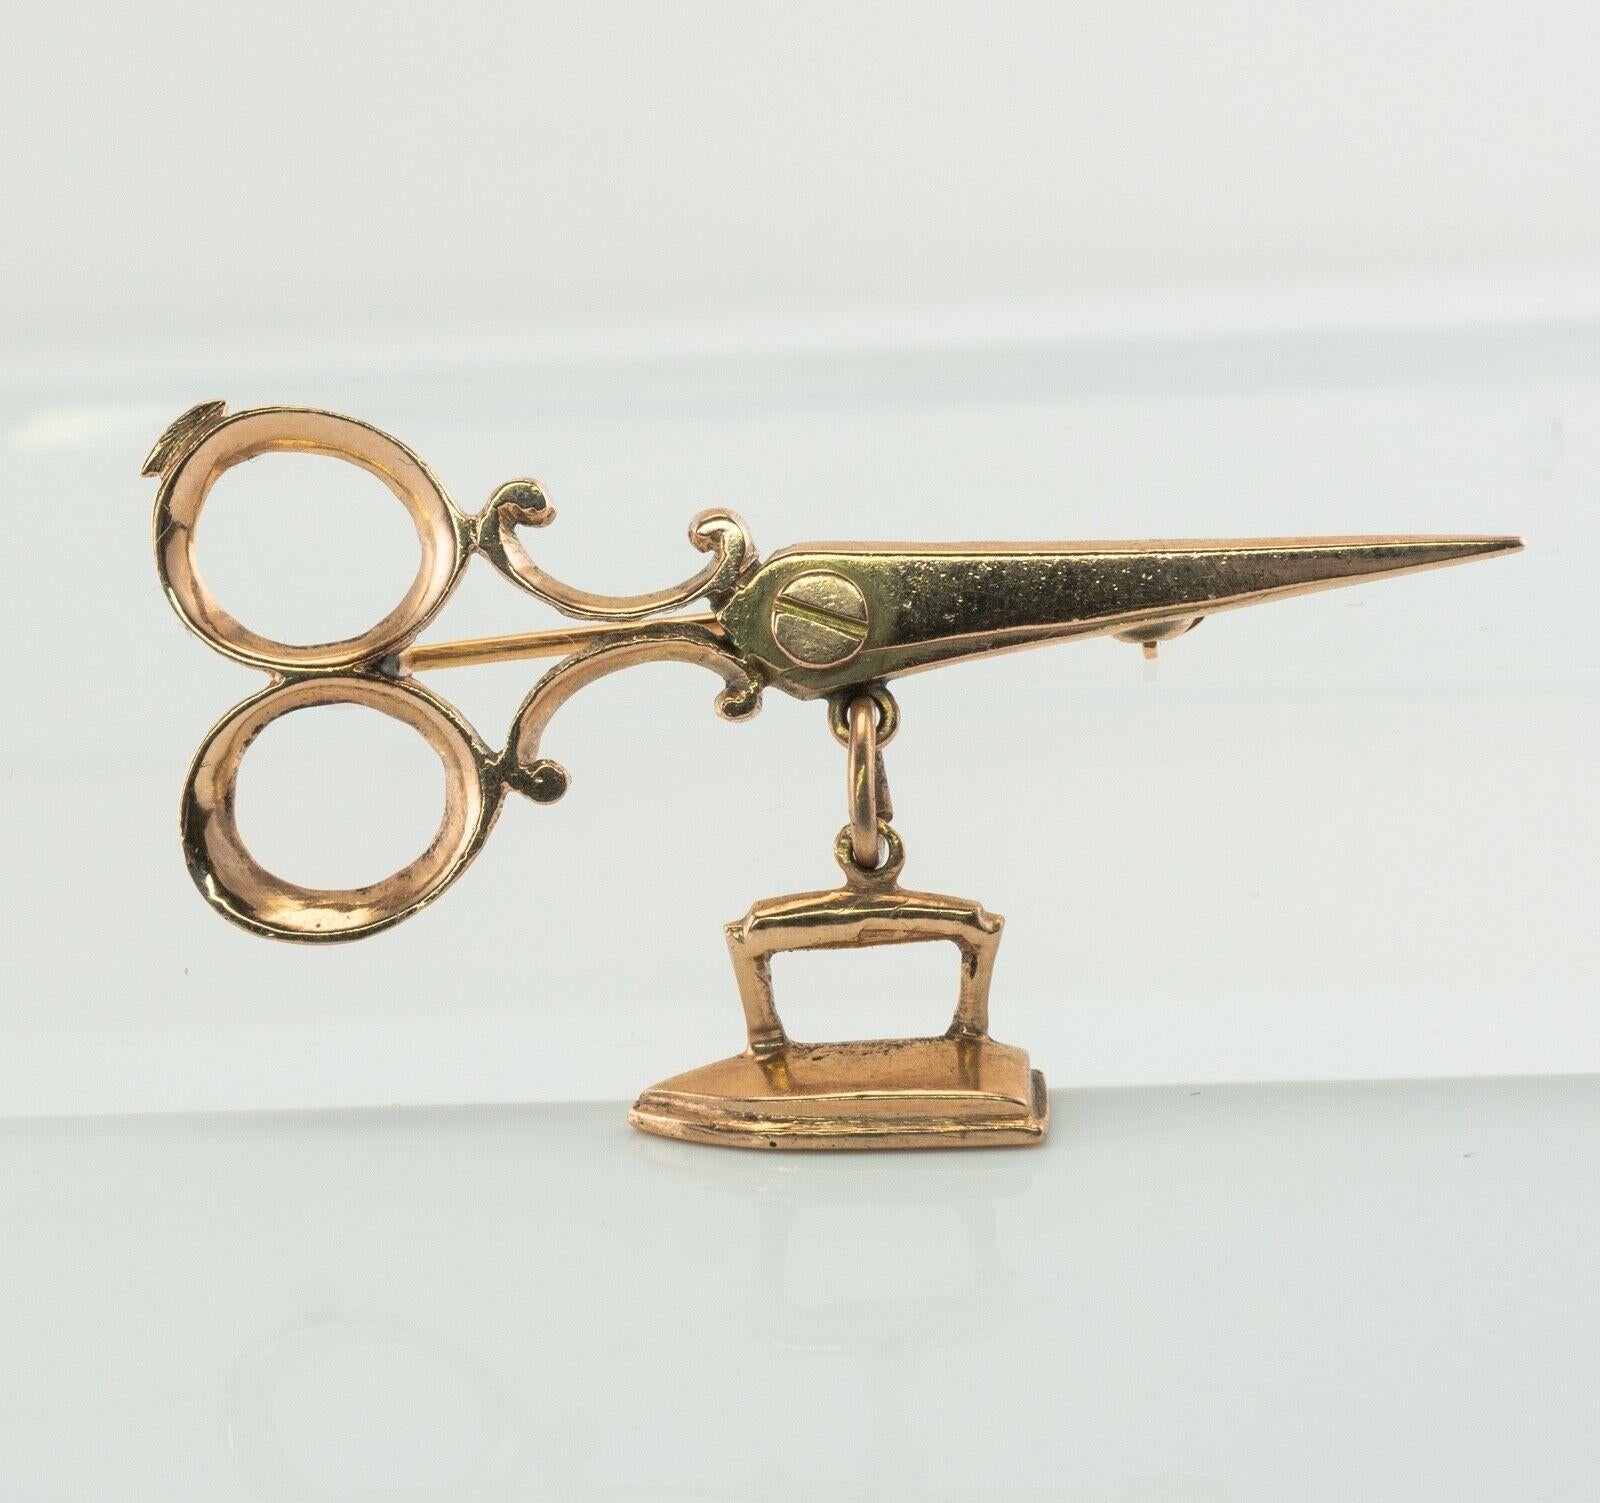 This cool vintage pin / brooch is made in solid 14K Rose Gold (carefully tested and guaranteed).
The scissors measure 1.5